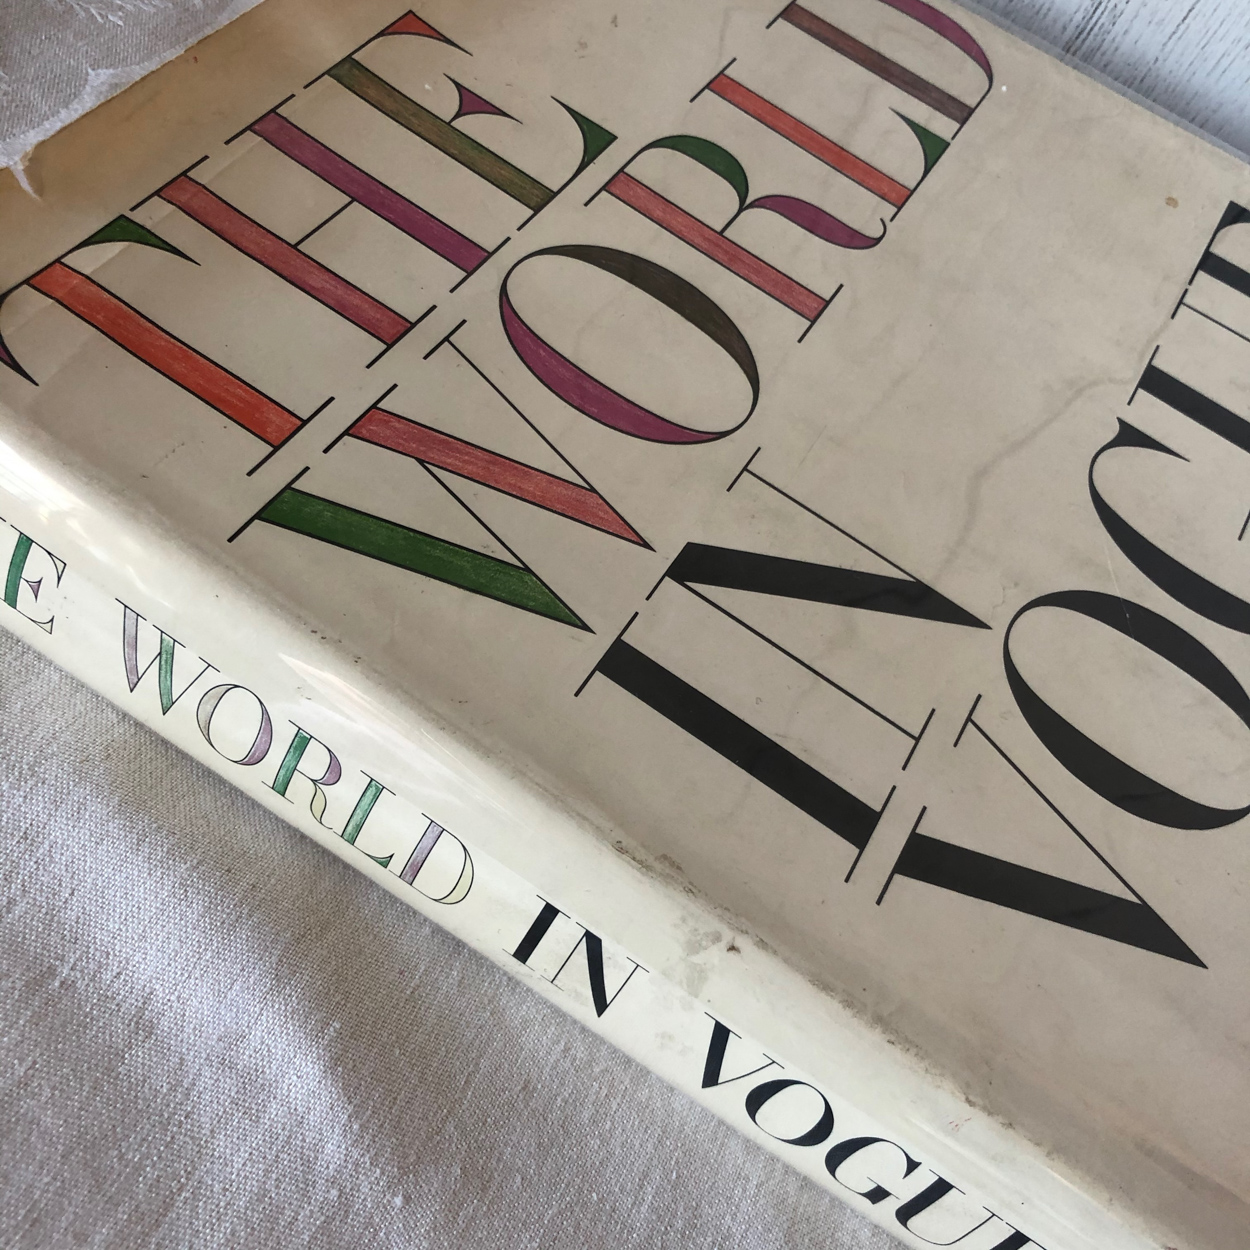 The World in Vogue, 1893 to 1963